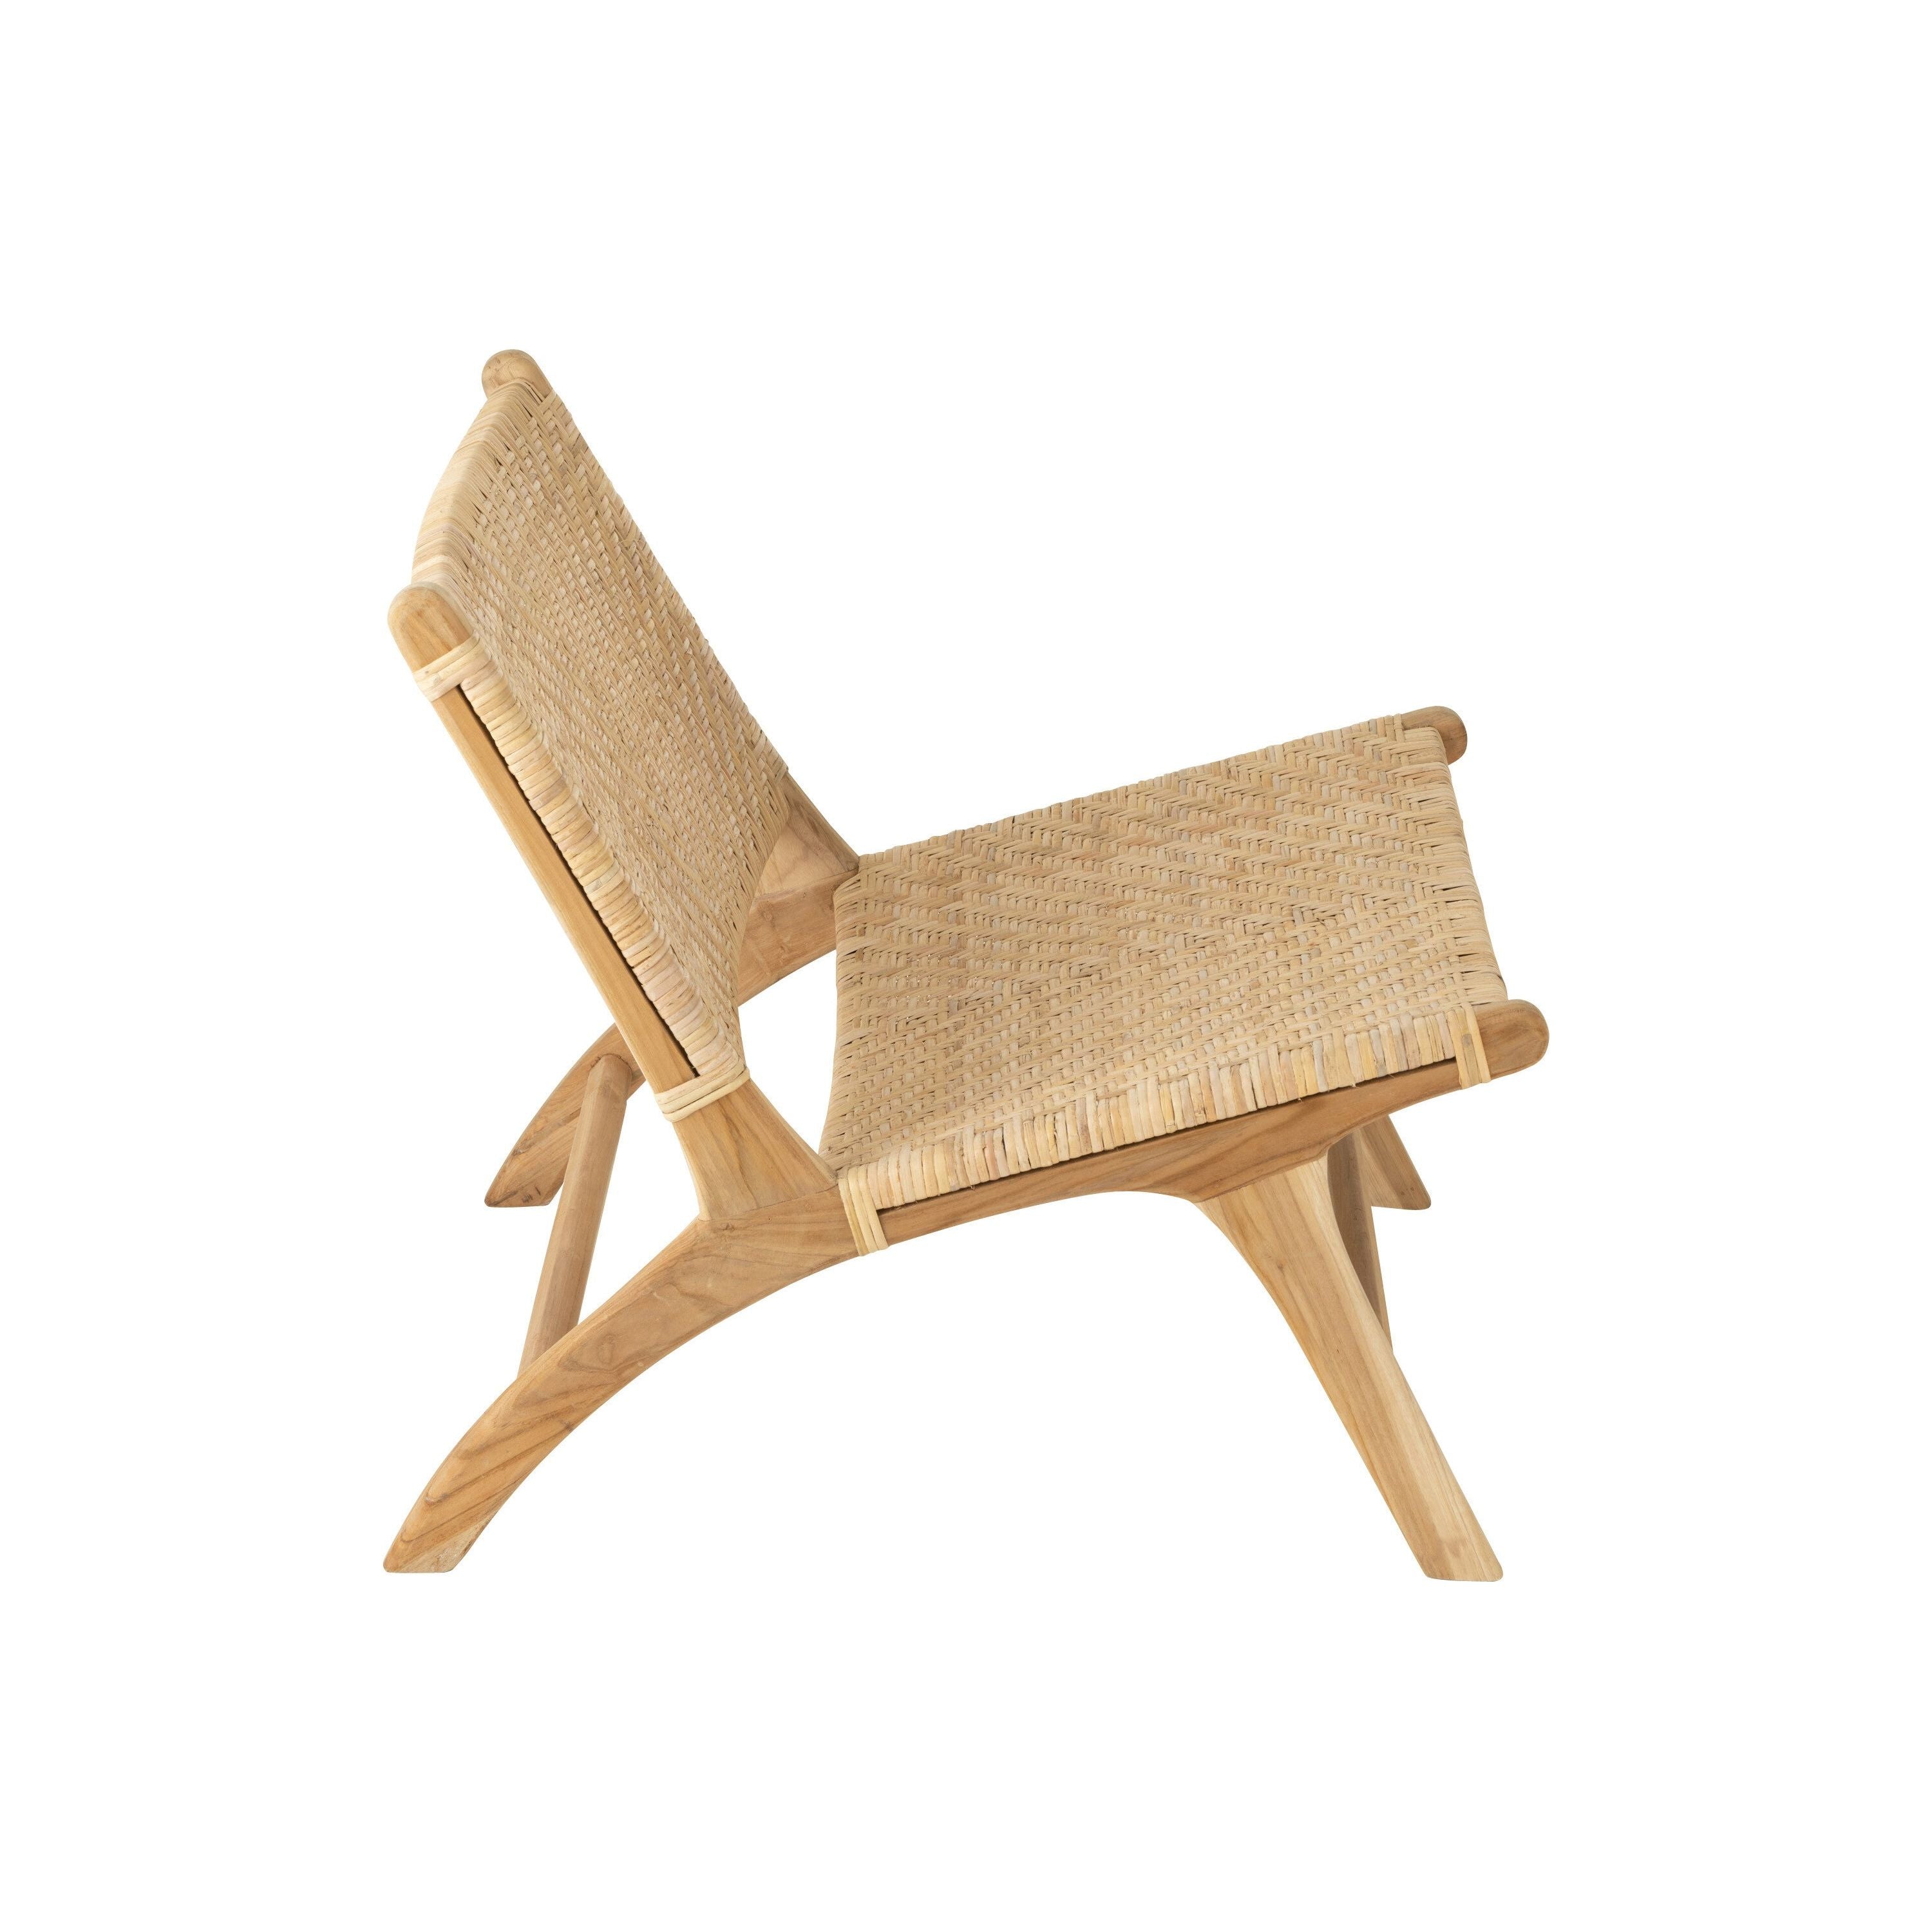 Seat Fixed Woven Rattan Natural